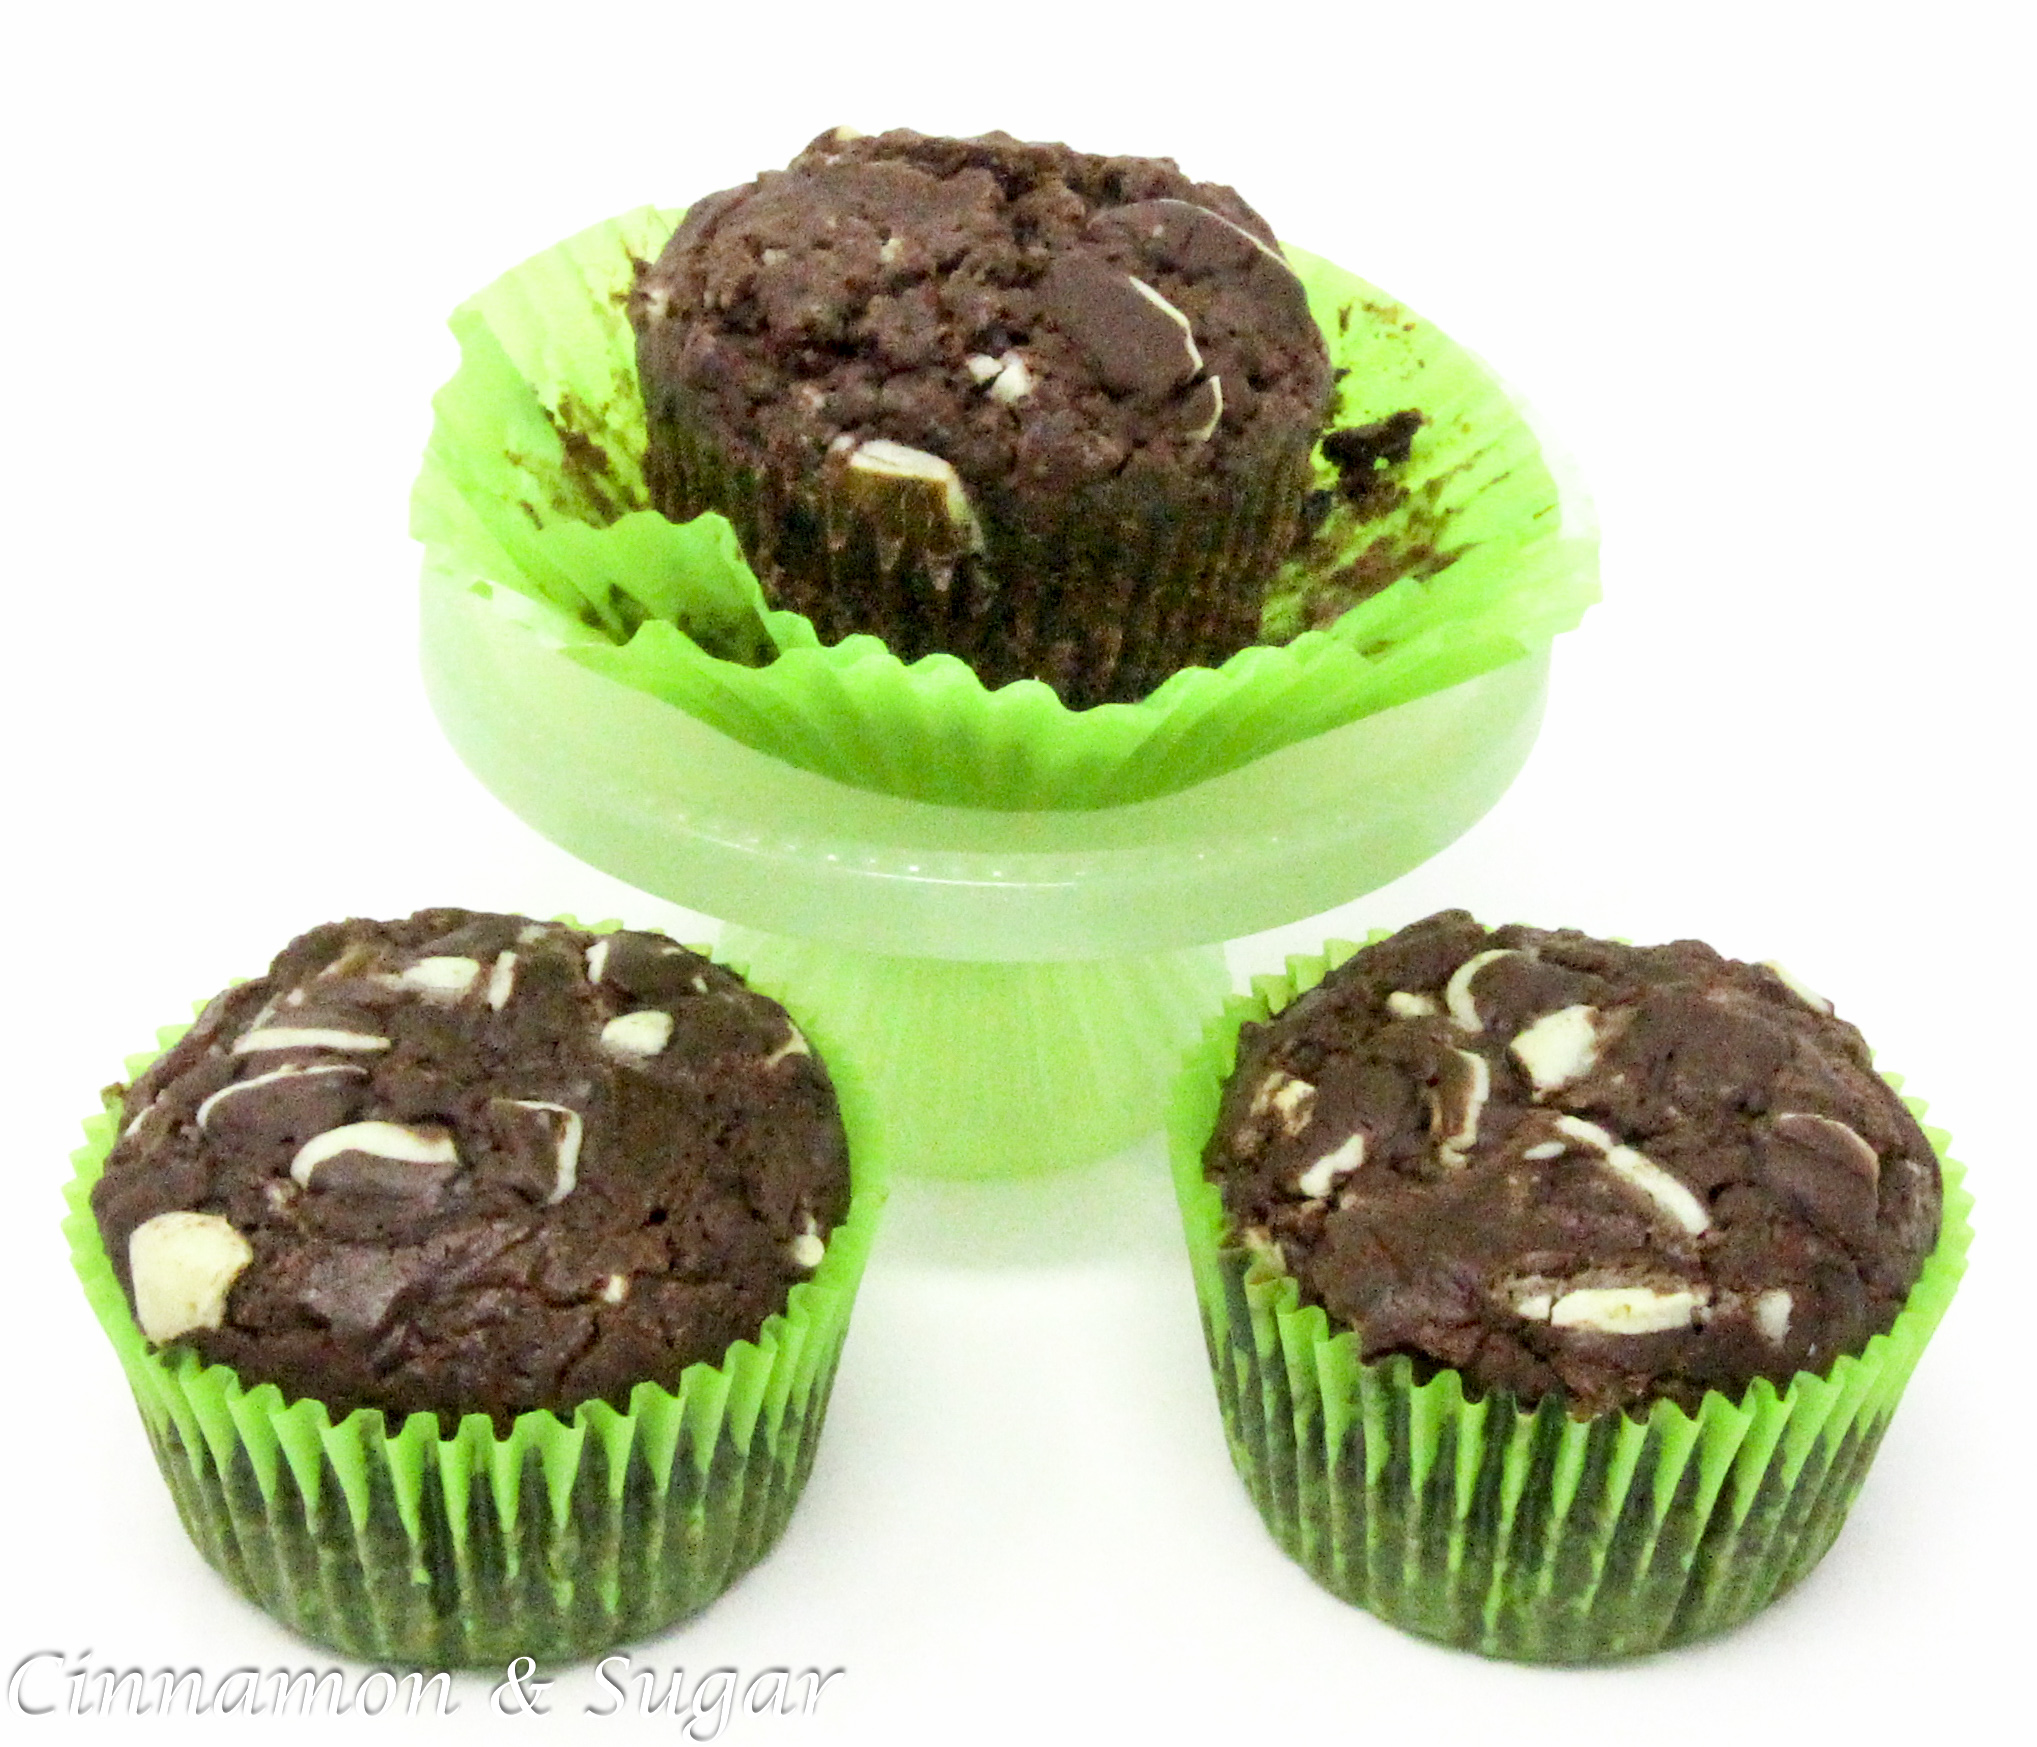 With a generous portion of of both cocoa powder and Andes Chocolate Mints, these rich Chocolate Mint Muffins could very well be classified as dessert cupcakes since they're so scrumptious! Recipe shared with permission granted by Daryl Wood Gerber, author of WINING AND DYING.